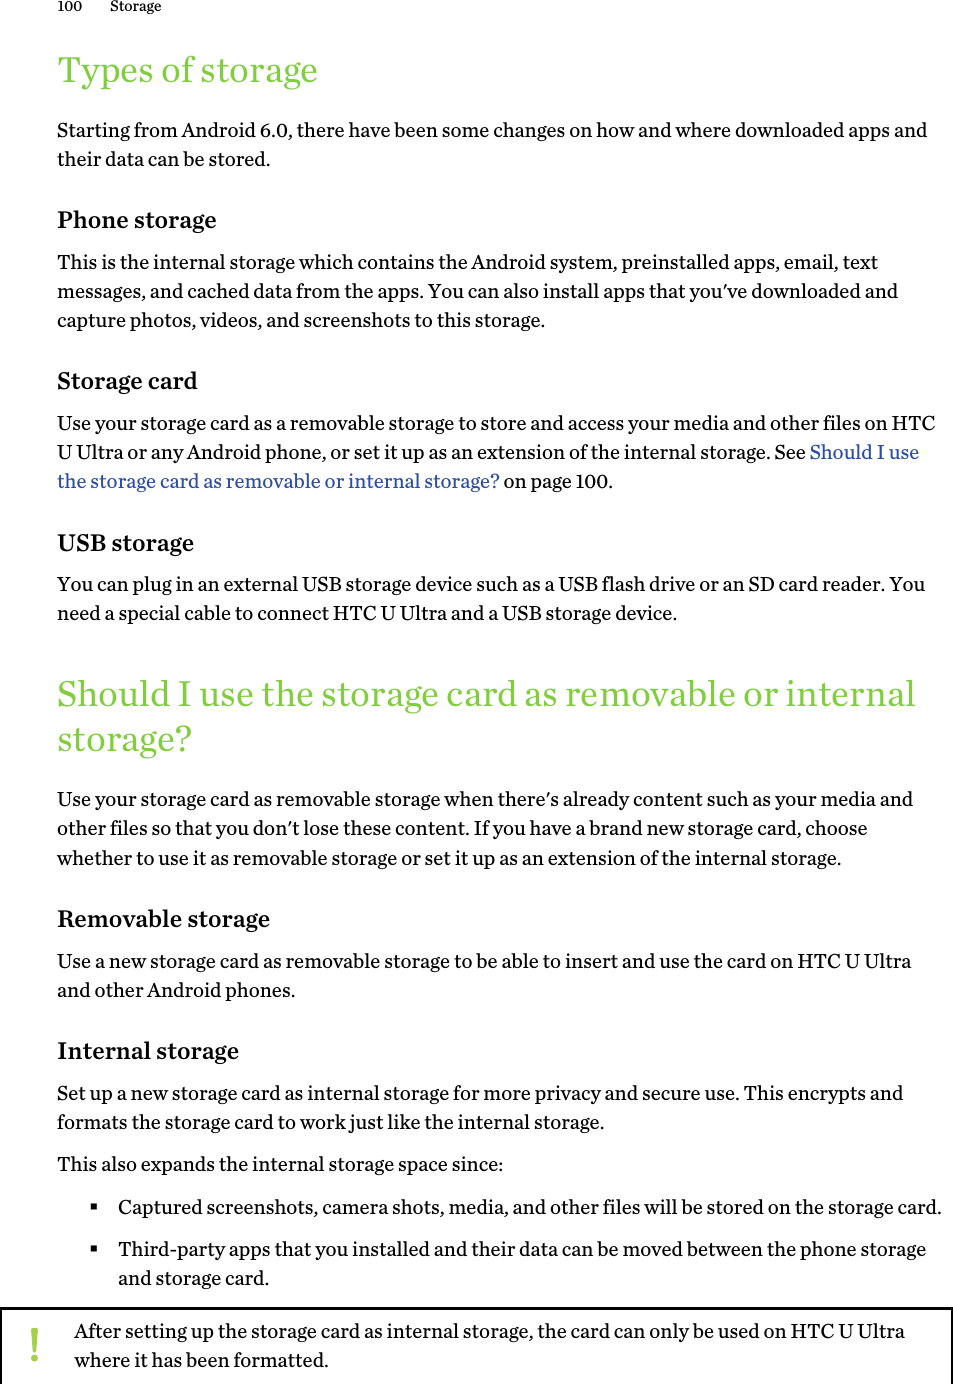 Types of storageStarting from Android 6.0, there have been some changes on how and where downloaded apps andtheir data can be stored.Phone storageThis is the internal storage which contains the Android system, preinstalled apps, email, textmessages, and cached data from the apps. You can also install apps that you&apos;ve downloaded andcapture photos, videos, and screenshots to this storage.Storage cardUse your storage card as a removable storage to store and access your media and other files on HTCU Ultra or any Android phone, or set it up as an extension of the internal storage. See Should I usethe storage card as removable or internal storage? on page 100.USB storageYou can plug in an external USB storage device such as a USB flash drive or an SD card reader. Youneed a special cable to connect HTC U Ultra and a USB storage device.Should I use the storage card as removable or internalstorage?Use your storage card as removable storage when there&apos;s already content such as your media andother files so that you don&apos;t lose these content. If you have a brand new storage card, choosewhether to use it as removable storage or set it up as an extension of the internal storage.Removable storageUse a new storage card as removable storage to be able to insert and use the card on HTC U Ultraand other Android phones.Internal storageSet up a new storage card as internal storage for more privacy and secure use. This encrypts andformats the storage card to work just like the internal storage.This also expands the internal storage space since:§Captured screenshots, camera shots, media, and other files will be stored on the storage card.§Third-party apps that you installed and their data can be moved between the phone storageand storage card.After setting up the storage card as internal storage, the card can only be used on HTC U Ultrawhere it has been formatted.100 Storage